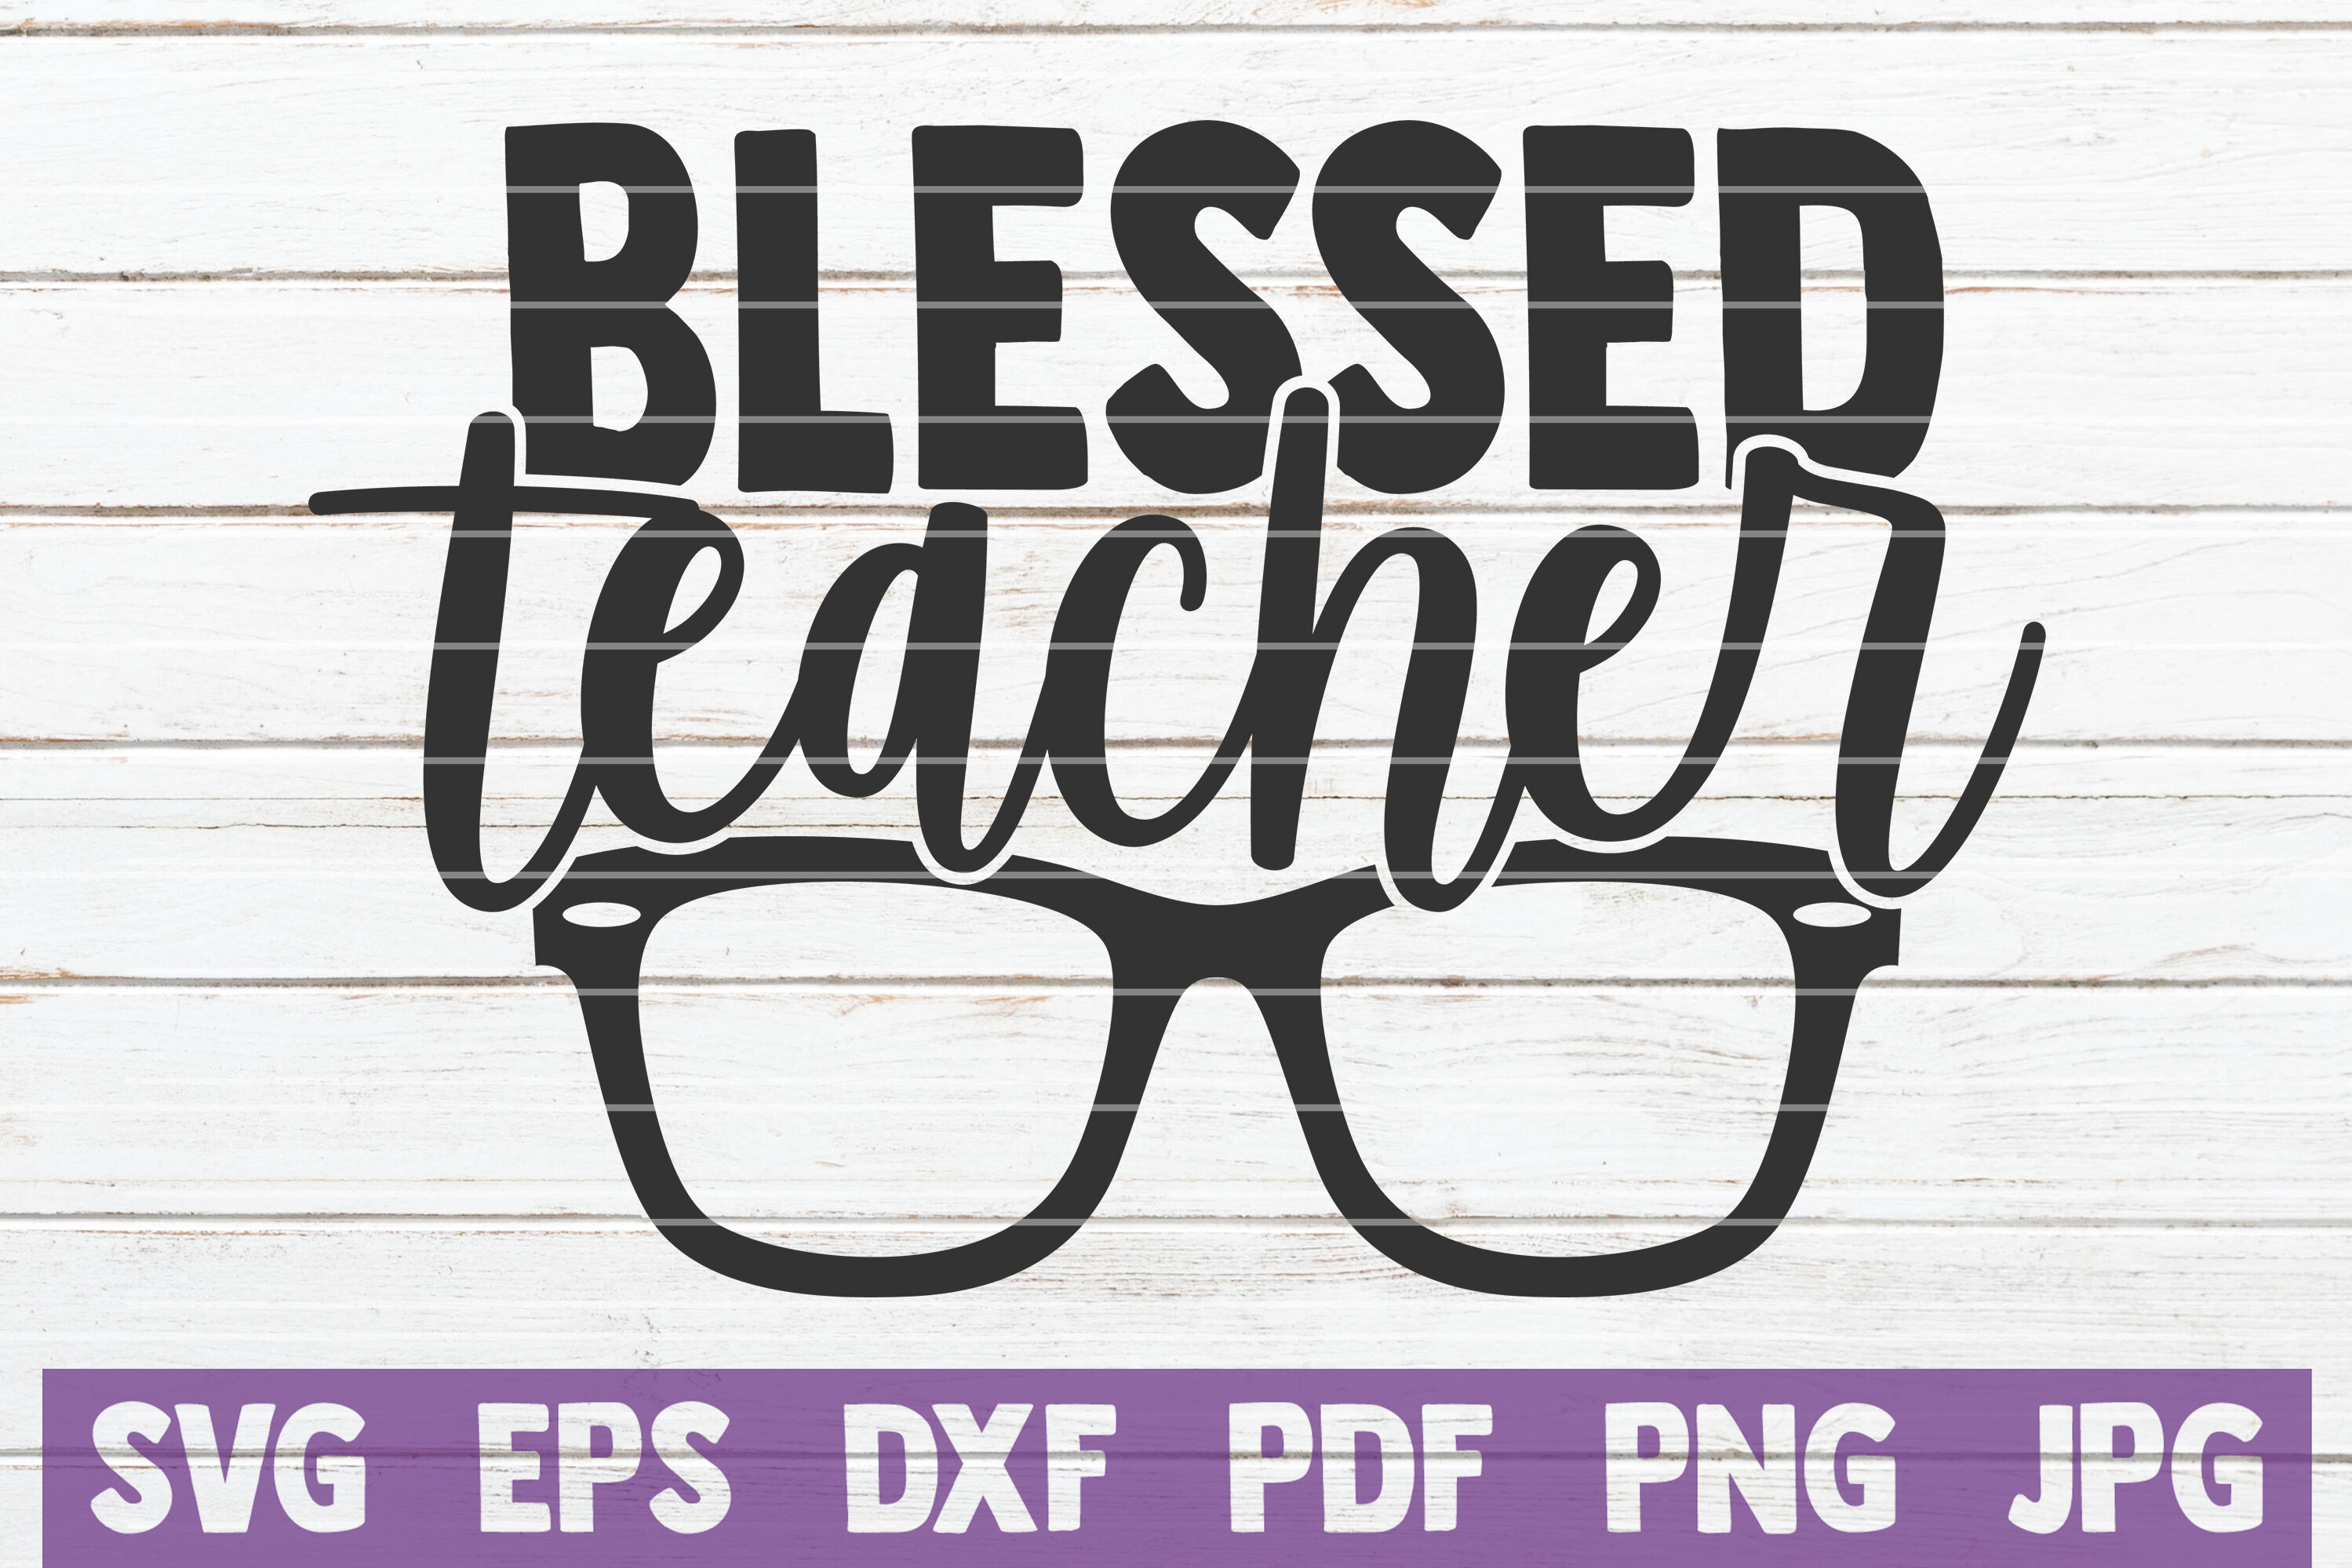 Download Blessed Teacher Svg Cut File By Mintymarshmallows Thehungryjpeg Com